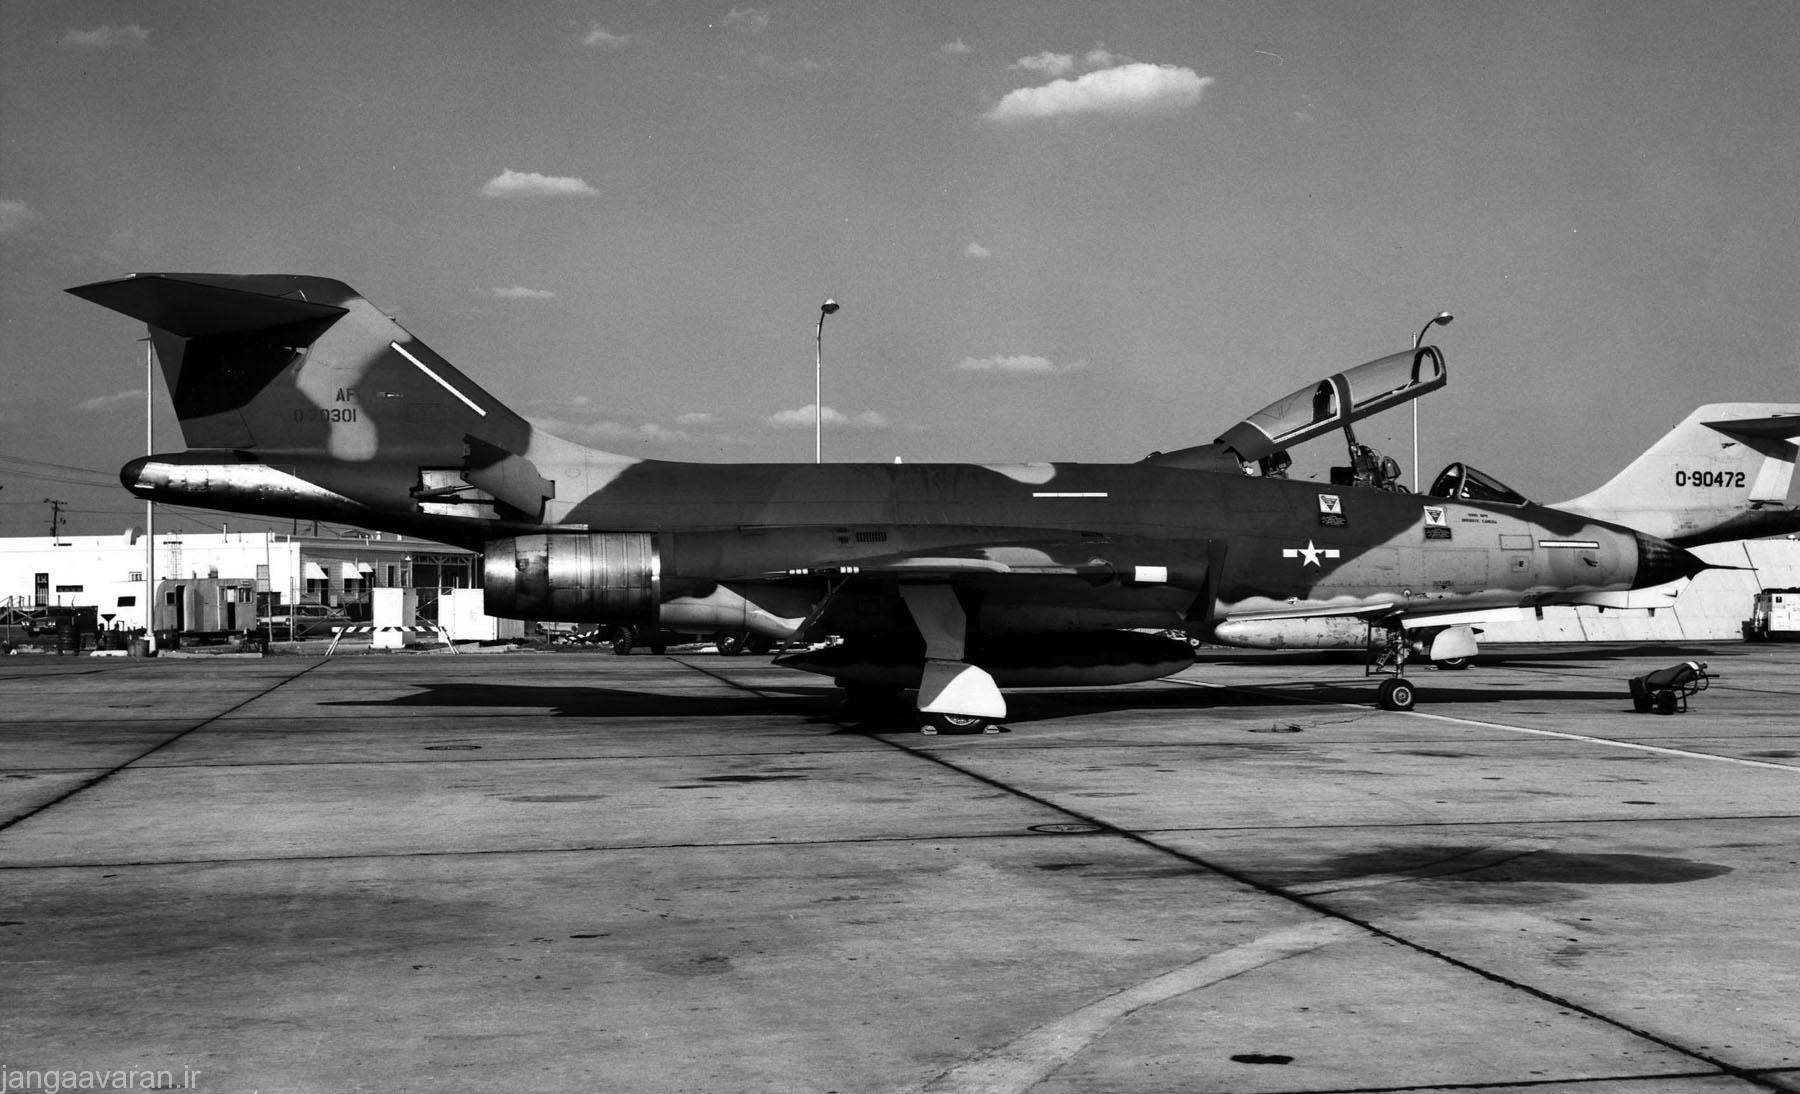 McDonnell F-101B-85-MC (S/N 57-0301). This airframe was the prototype RF-101B and was the only RF-101B that did not originally serve in Canada as a CF-101B. (U.S. Air Force photo)